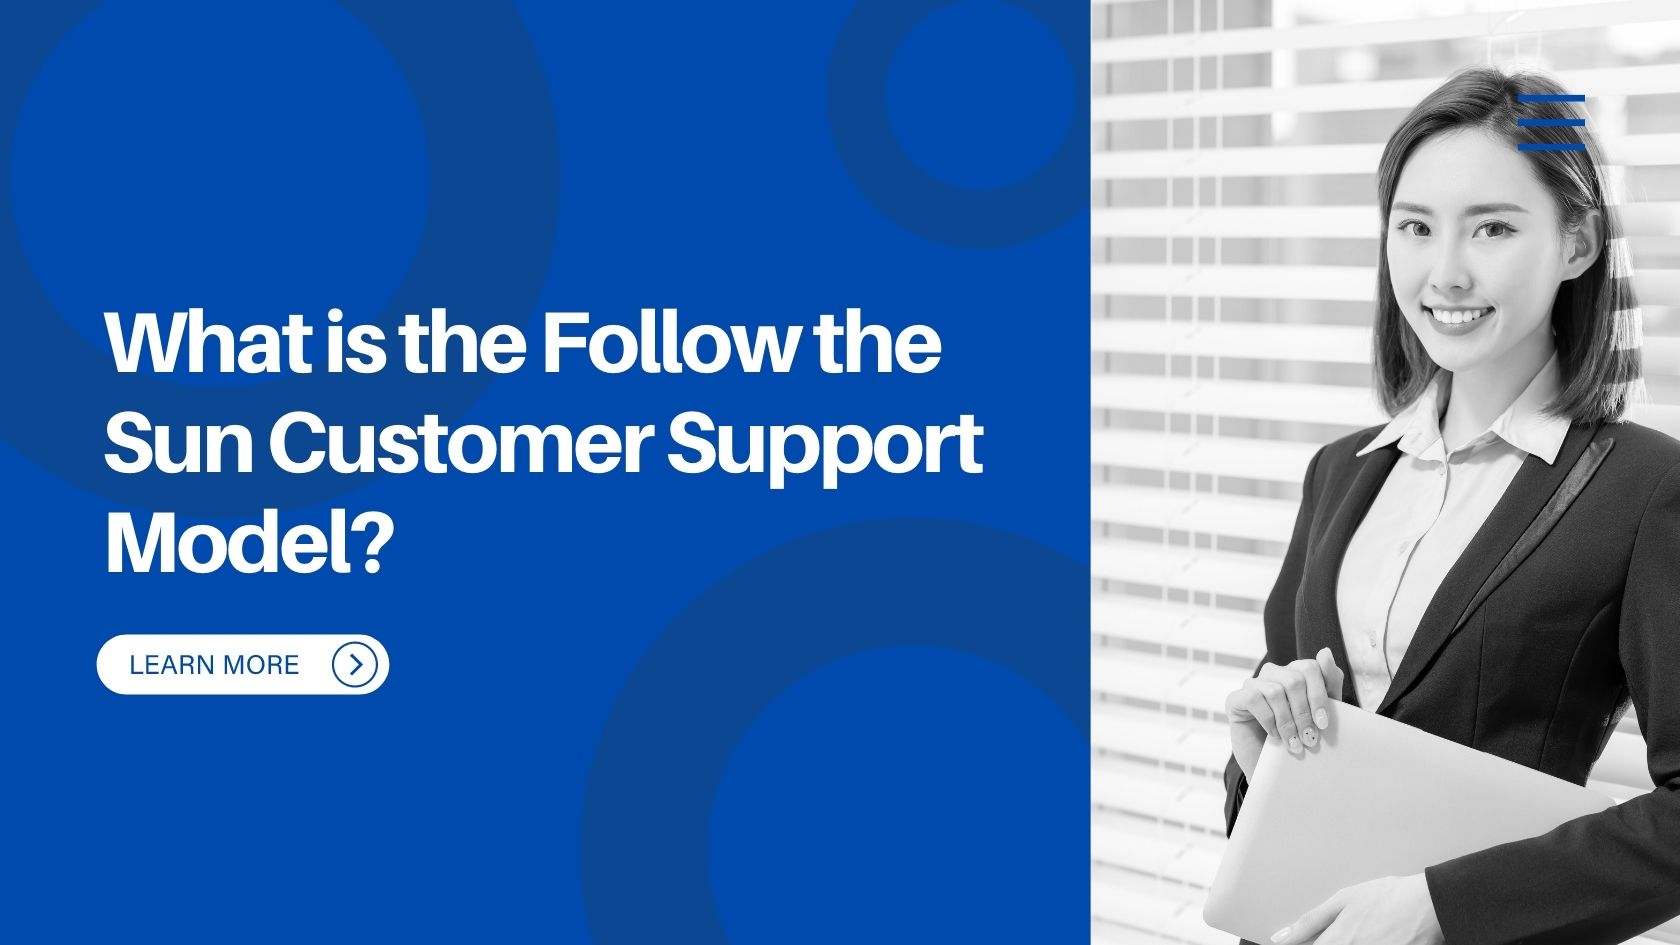 What is the Follow the Sun Customer Support Model